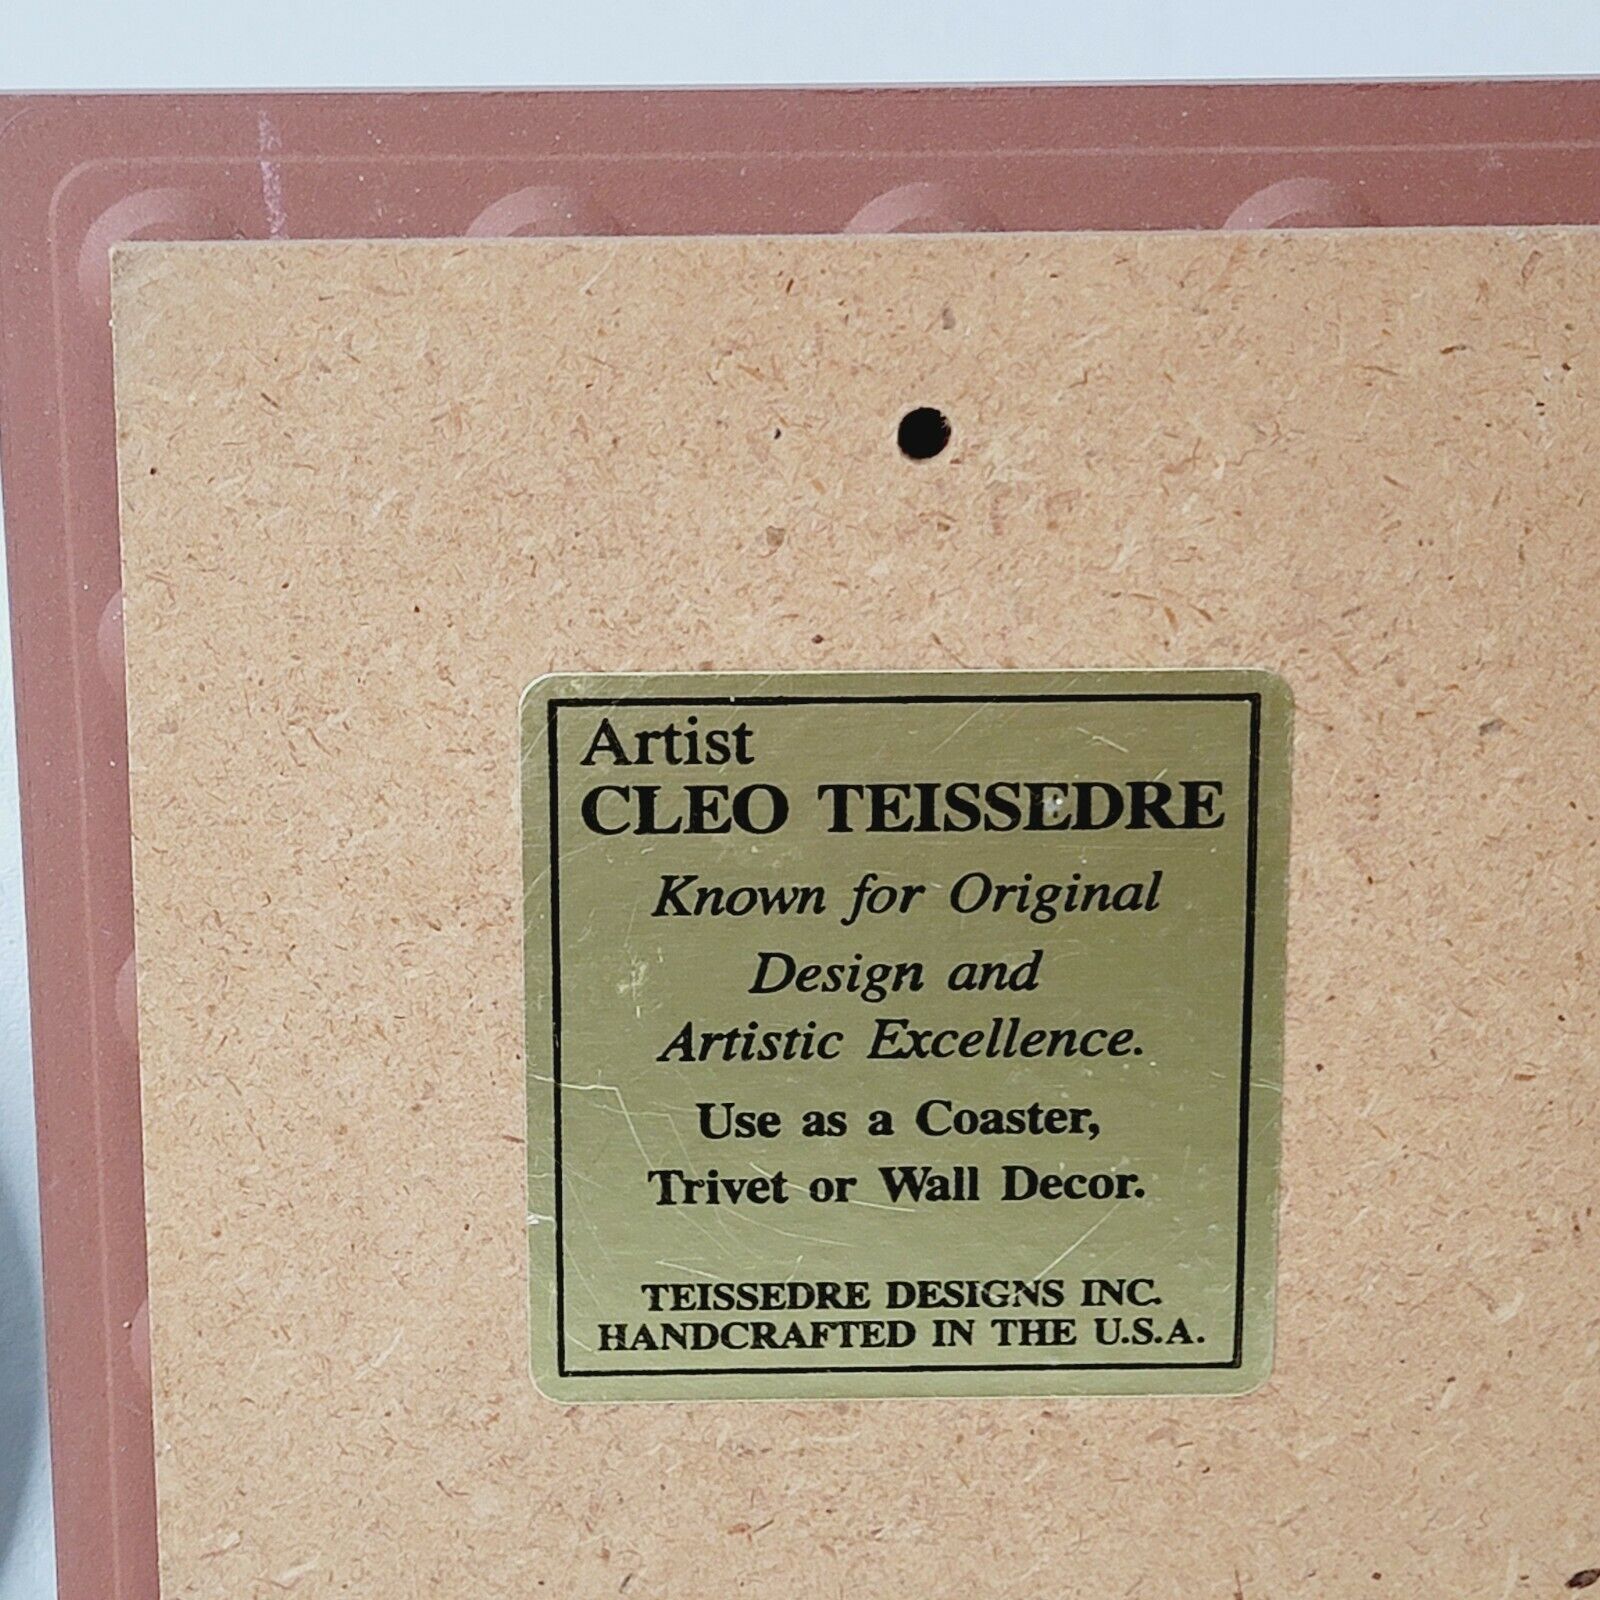 2 Cleo Teissedre Southwest Teal Red Hand Painted Art Tile Trivet Coaster ‘83 ‘90 Cleo Teissedre - фотография #5